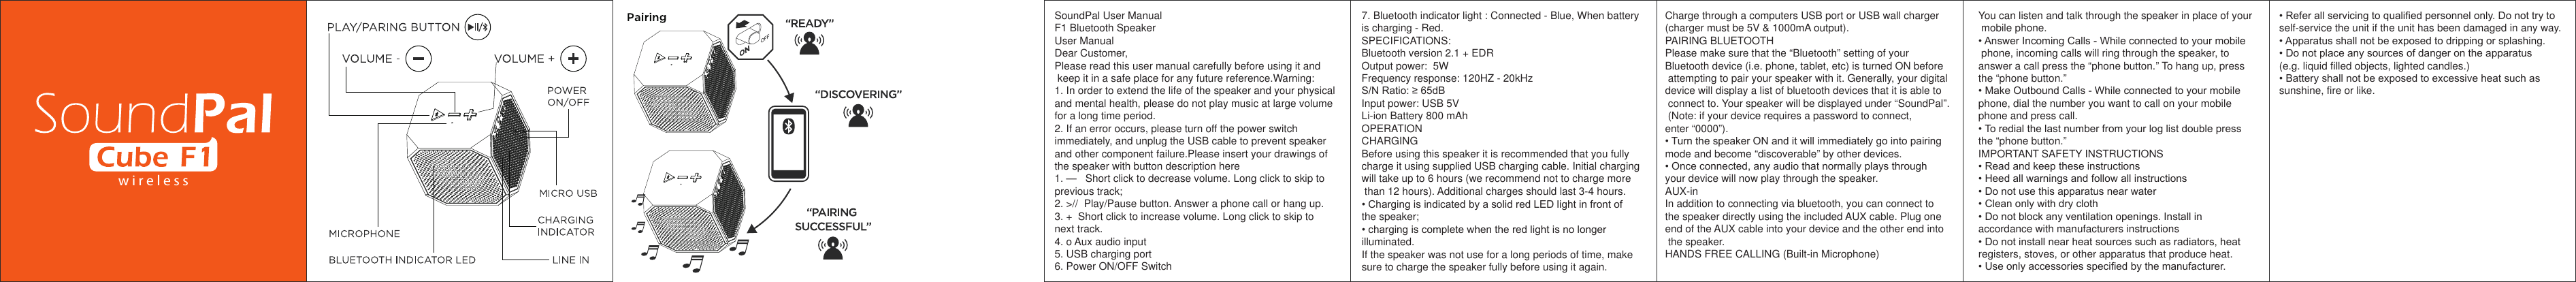 w i r e l e s sSoundPal User ManualF1 Bluetooth SpeakerUser ManualDear Customer,Please read this user manual carefully before using it and keep it in a safe place for any future reference.Warning:1. In order to extend the life of the speaker and your physicaland mental health, please do not play music at large volumefor a long time period.2. If an error occurs, please turn off the power switchimmediately, and unplug the USB cable to prevent speakerand other component failure.Please insert your drawings ofthe speaker with button description here1. —   Short click to decrease volume. Long click to skip toprevious track;2. &gt;//  Play/Pause button. Answer a phone call or hang up.3. +  Short click to increase volume. Long click to skip tonext track.4. o Aux audio input5. USB charging port6. Power ON/OFF Switch7. Bluetooth indicator light : Connected - Blue, When batteryis charging - Red.SPECIFICATIONS:Bluetooth version 2.1 + EDROutput power:  5WFrequency response: 120HZ - 20kHzS/N Ratio: ≥ 65dBInput power: USB 5VLi-ion Battery 800 mAhOPERATIONCHARGINGBefore using this speaker it is recommended that you fullycharge it using supplied USB charging cable. Initial chargingwill take up to 6 hours (we recommend not to charge morethan 12 hours). Additional charges should last 3-4 hours.• Charging is indicated by a solid red LED light in front ofthe speaker;• charging is complete when the red light is no longerilluminated.If the speaker was not use for a long periods of time, makesure to charge the speaker fully before using it again.Charge through a computers USB port or USB wall charger (charger must be 5V &amp; 1000mA output).PAIRING BLUETOOTHPlease make sure that the “Bluetooth” setting of your Bluetooth device (i.e. phone, tablet, etc) is turned ON before attempting to pair your speaker with it. Generally, your digital device will display a list of bluetooth devices that it is able to connect to. Your speaker will be displayed under “SoundPal”. (Note: if your device requires a password to connect, enter “0000”).• Turn the speaker ON and it will immediately go into pairingmode and become “discoverable” by other devices.• Once connected, any audio that normally plays throughyour device will now play through the speaker.AUX-inIn addition to connecting via bluetooth, you can connect tothe speaker directly using the included AUX cable. Plug oneend of the AUX cable into your device and the other end intothe speaker.HANDS FREE CALLING (Built-in Microphone)You can listen and talk through the speaker in place of your mobile phone.• Answer Incoming Calls - While connected to your mobilephone, incoming calls will ring through the speaker, toanswer a call press the “phone button.” To hang up, pressthe “phone button.”• Make Outbound Calls - While connected to your mobilephone, dial the number you want to call on your mobilephone and press call.• To redial the last number from your log list double pressthe “phone button.”IMPORTANT SAFETY INSTRUCTIONS• Read and keep these instructions• Heed all warnings and follow all instructions• Do not use this apparatus near water• Clean only with dry cloth• Do not block any ventilation openings. Install inaccordance with manufacturers instructions• Do not install near heat sources such as radiators, heatregisters, stoves, or other apparatus that produce heat.• Use only accessories specified by the manufacturer.• Refer all servicing to qualified personnel only. Do not try toself-service the unit if the unit has been damaged in any way.• Apparatus shall not be exposed to dripping or splashing.• Do not place any sources of danger on the apparatus(e.g. liquid filled objects, lighted candles.)• Battery shall not be exposed to excessive heat such assunshine, fire or like.